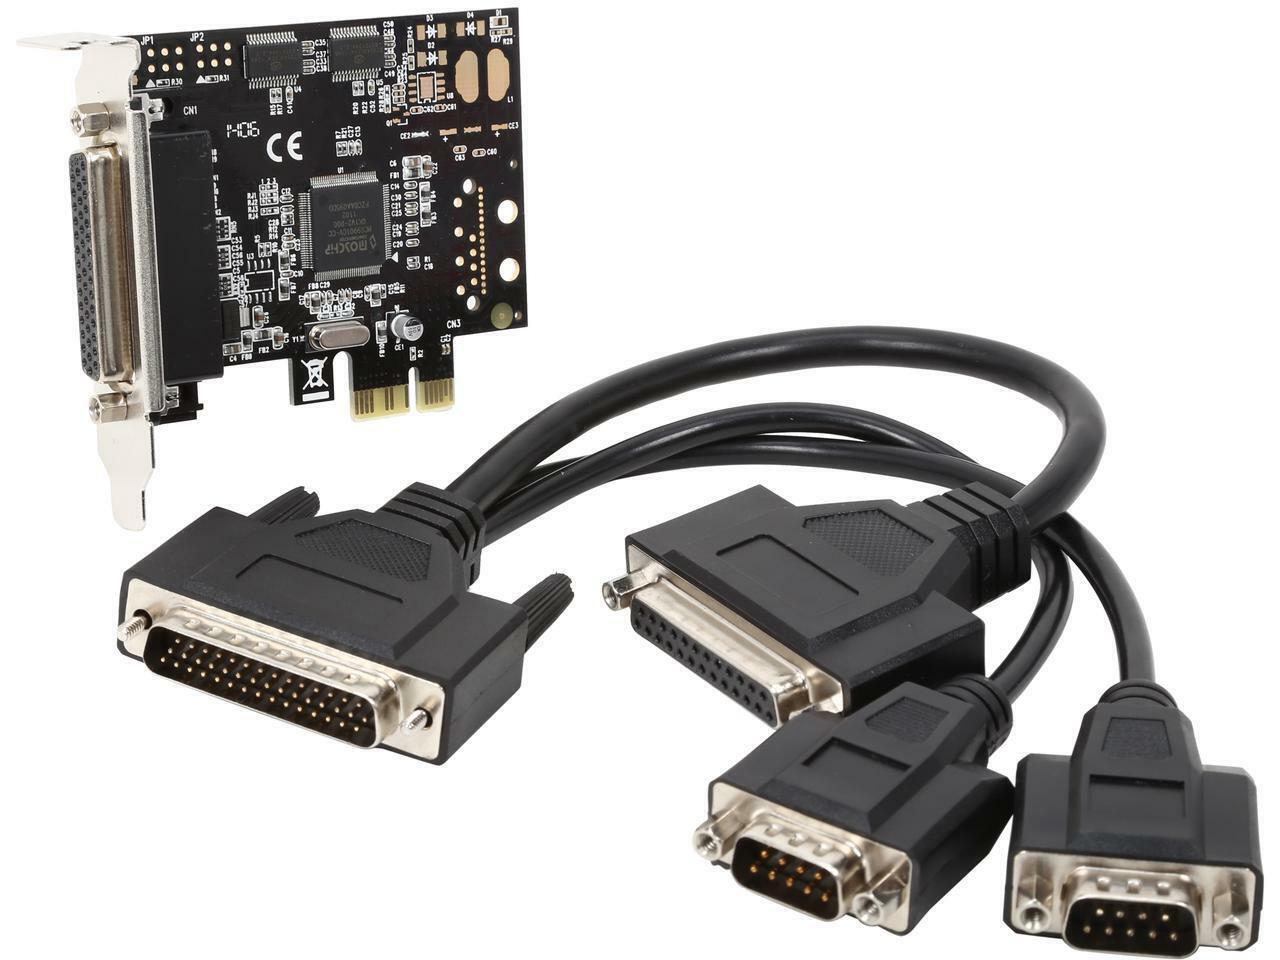 StarTech.com 2S1P PCI Express Serial Parallel Combo Card with Breakout Cable Mod